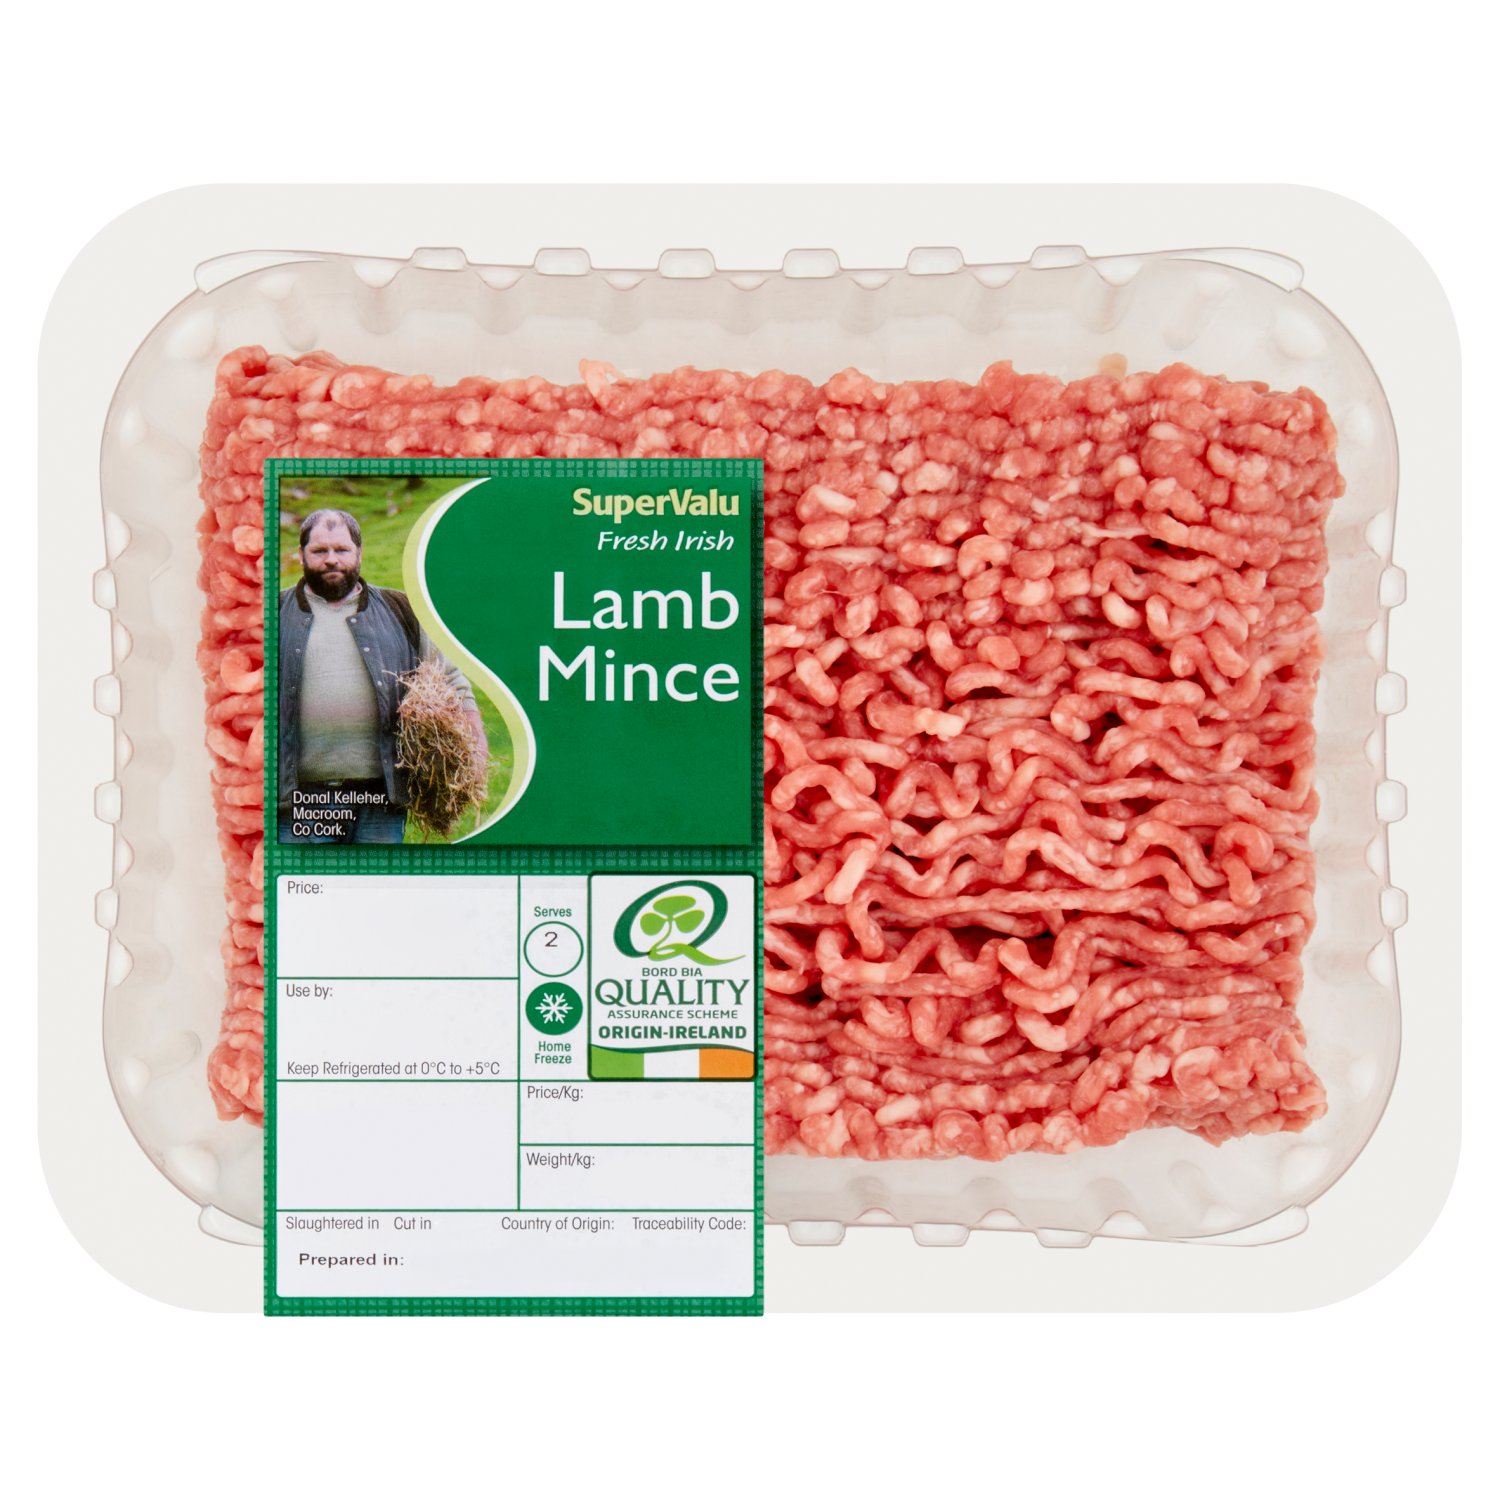 Packaged in a protective atmosphere.

Percentage of fat under 15%.
Connective tissue: meat protein ratio under 15.

Quality Assurance Scheme Bord BIA - Origin-Ireland